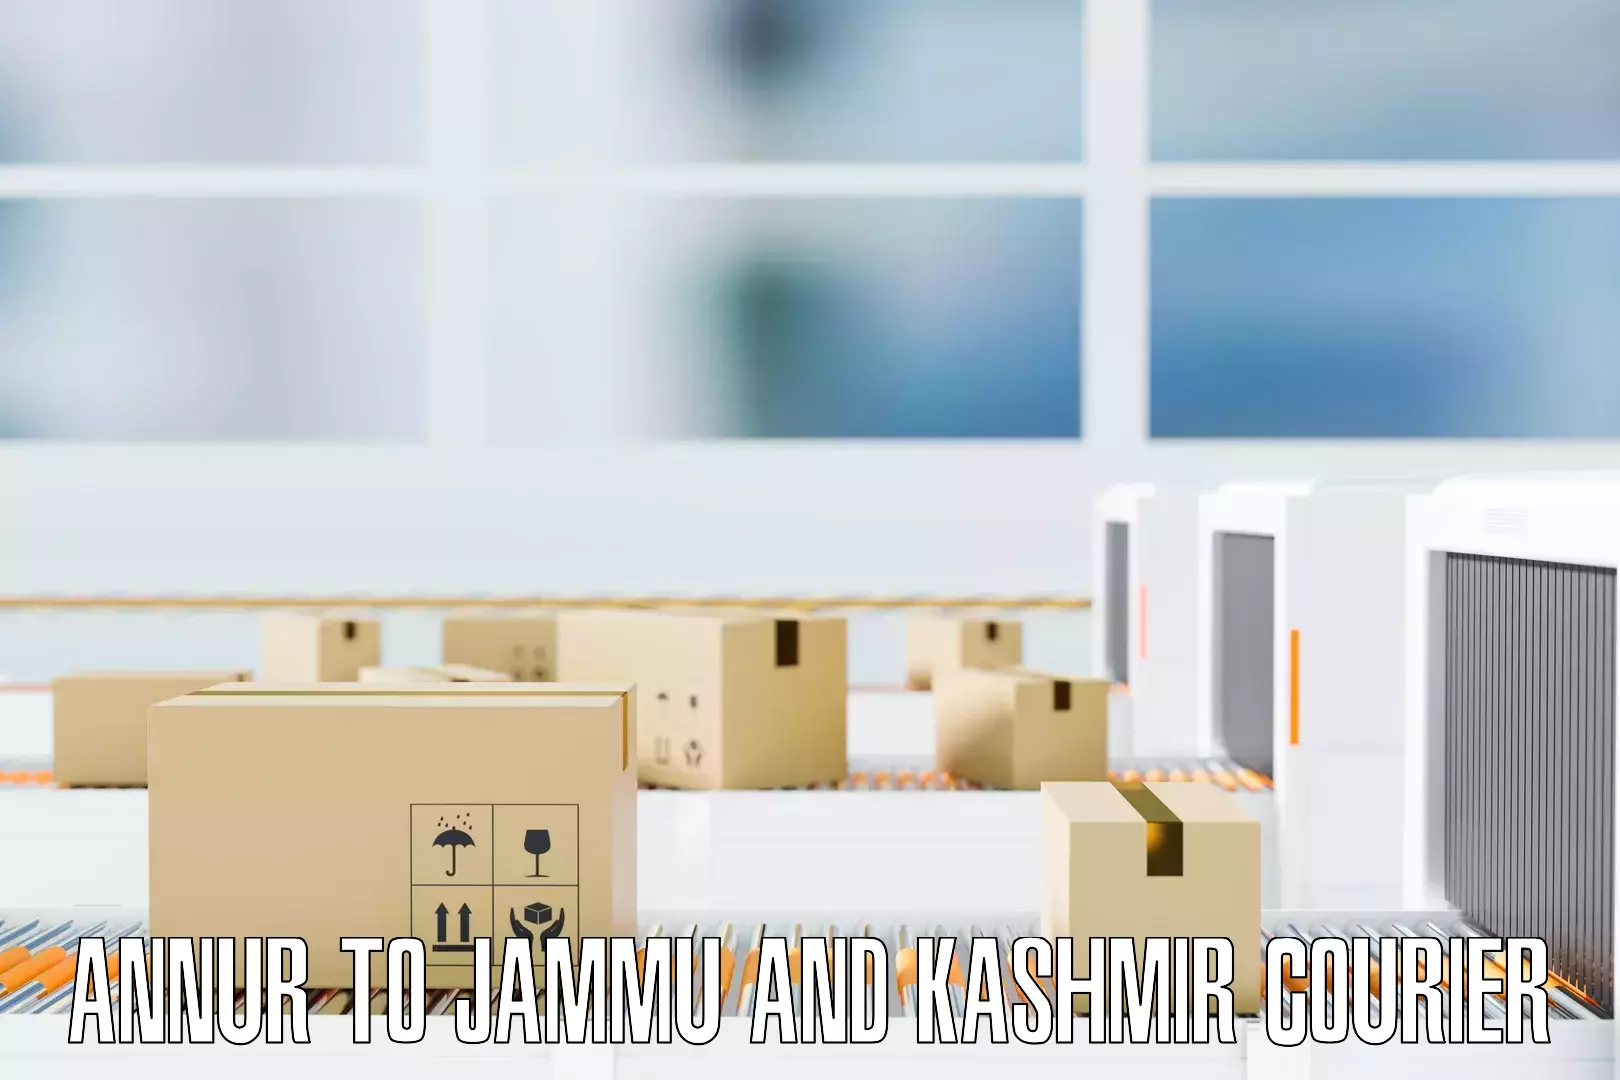 Trusted relocation services Annur to University of Jammu